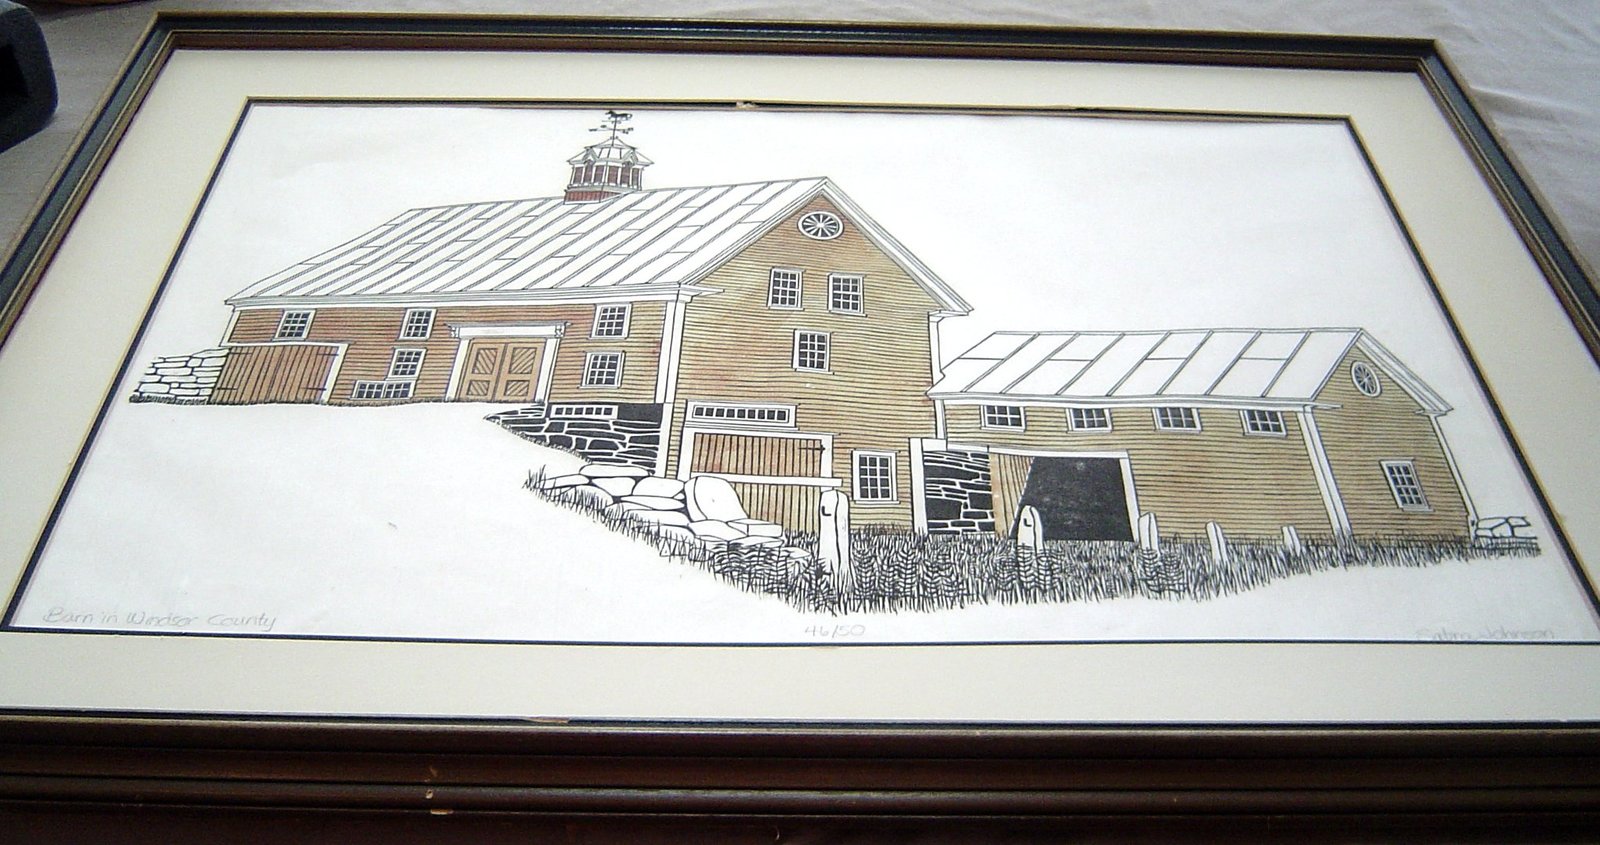 Primary image for  Sabra Johnson (Field) Print 'Barn in Windsor County" Signed, Numbered